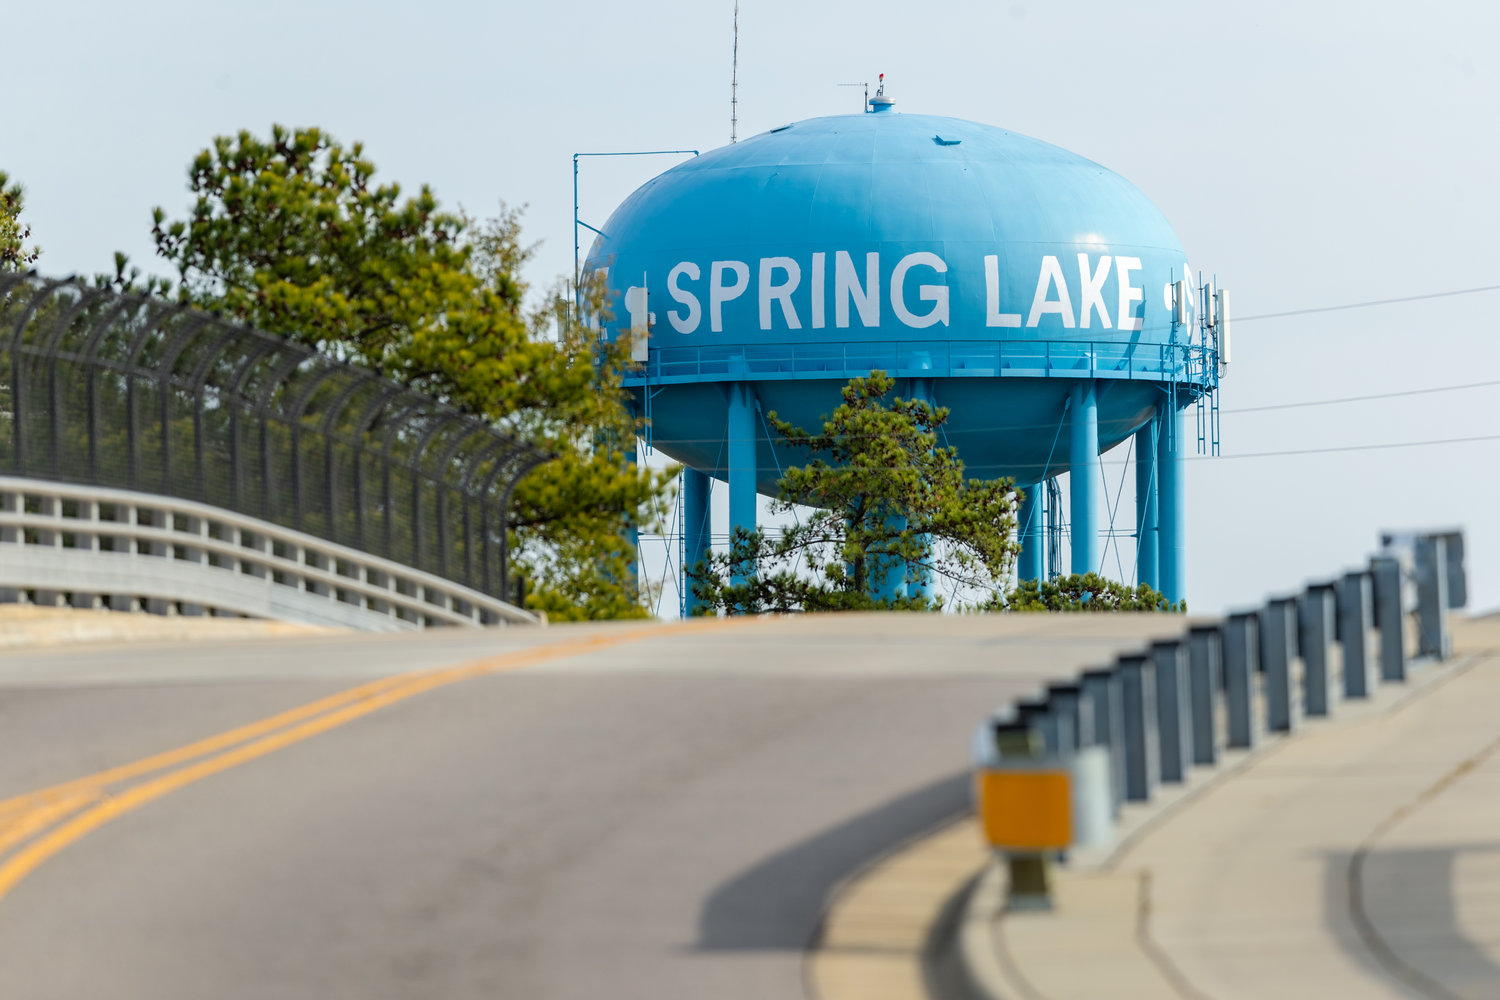 The Local Government Commission has officially denied a proposed employment agreement that would allow the town of Spring Lake to hire Justine Jones as its next town manager.